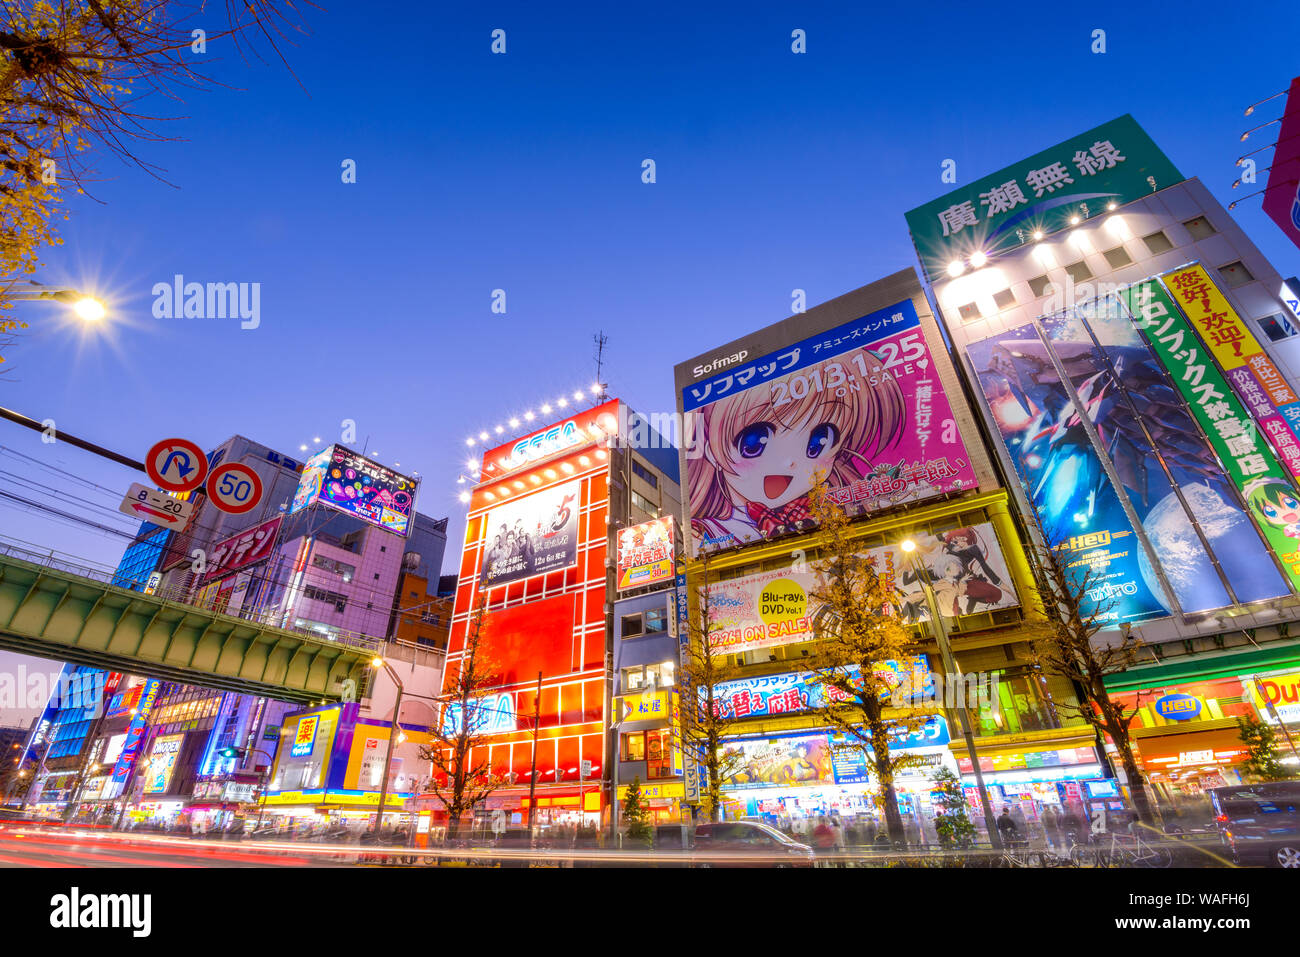 TOKYO - JANUARY 2: Akihabara district January 2, 2013 in Tokyo, JP. The district is a major shopping area for electronic, computer, anime, games and o Stock Photo